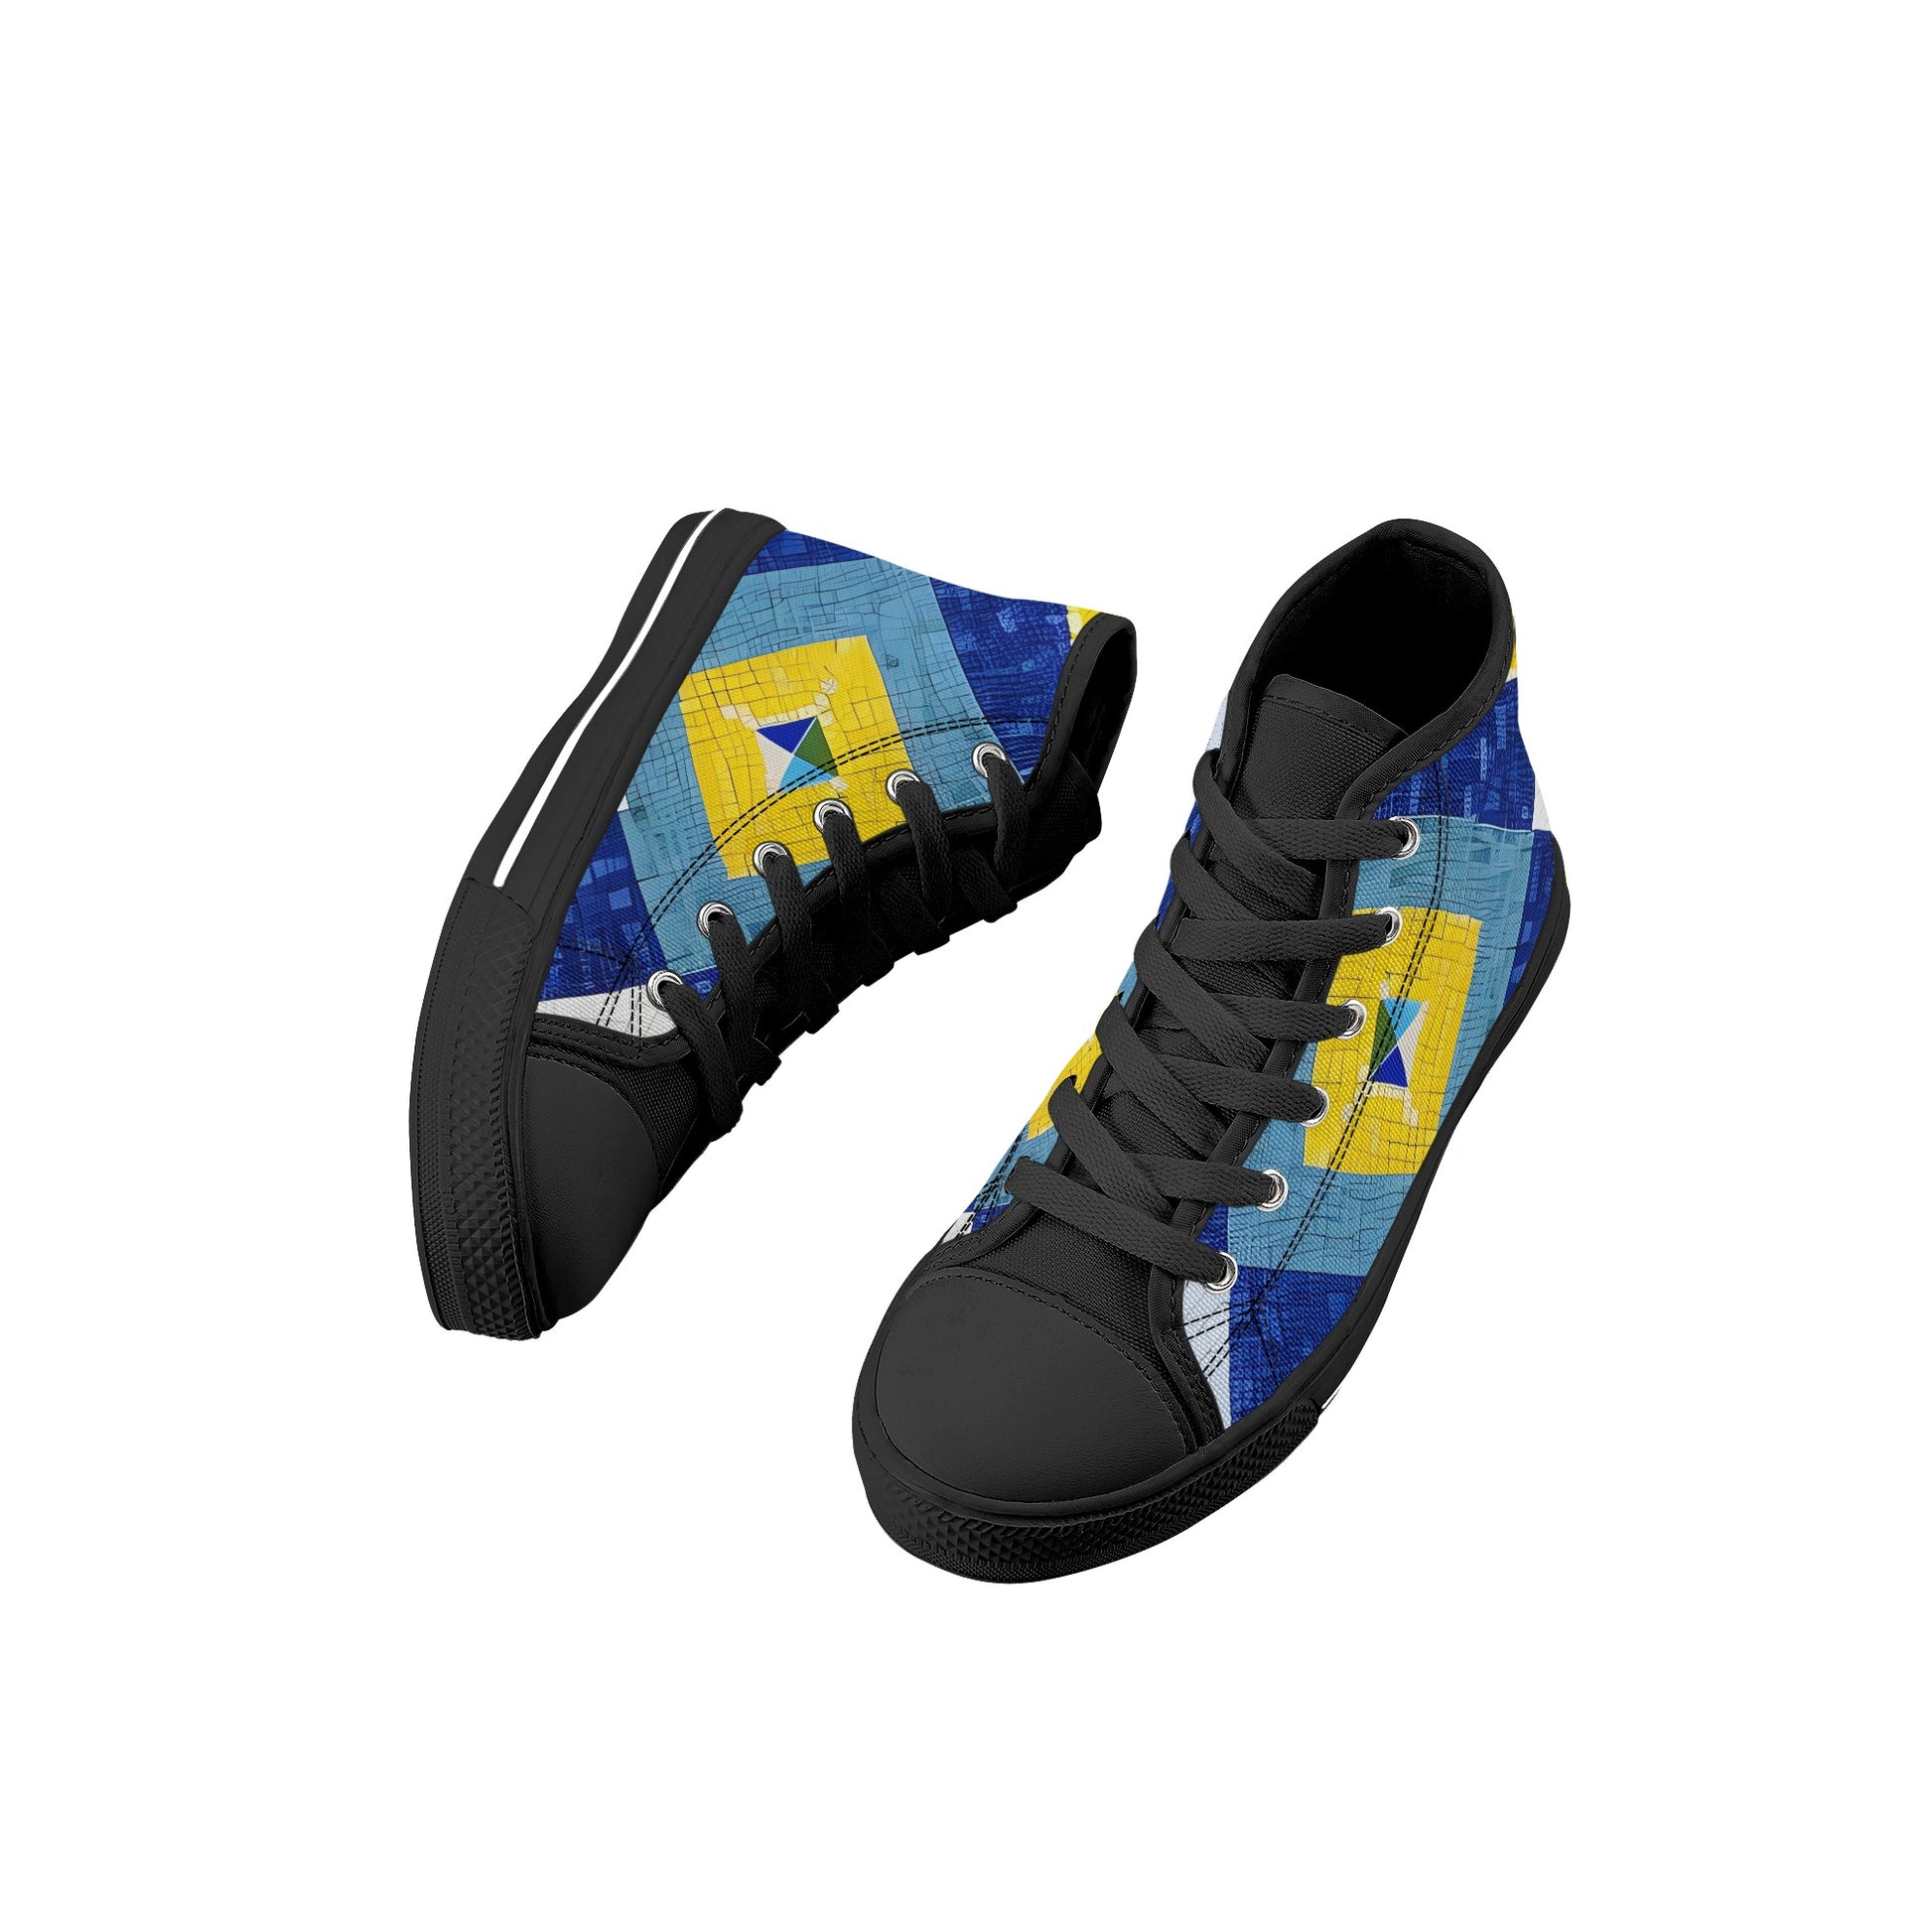 Splash Mosaic Kids High-Top Canvas Shoes | Stylish, Comfortable, and Durable - AGTC